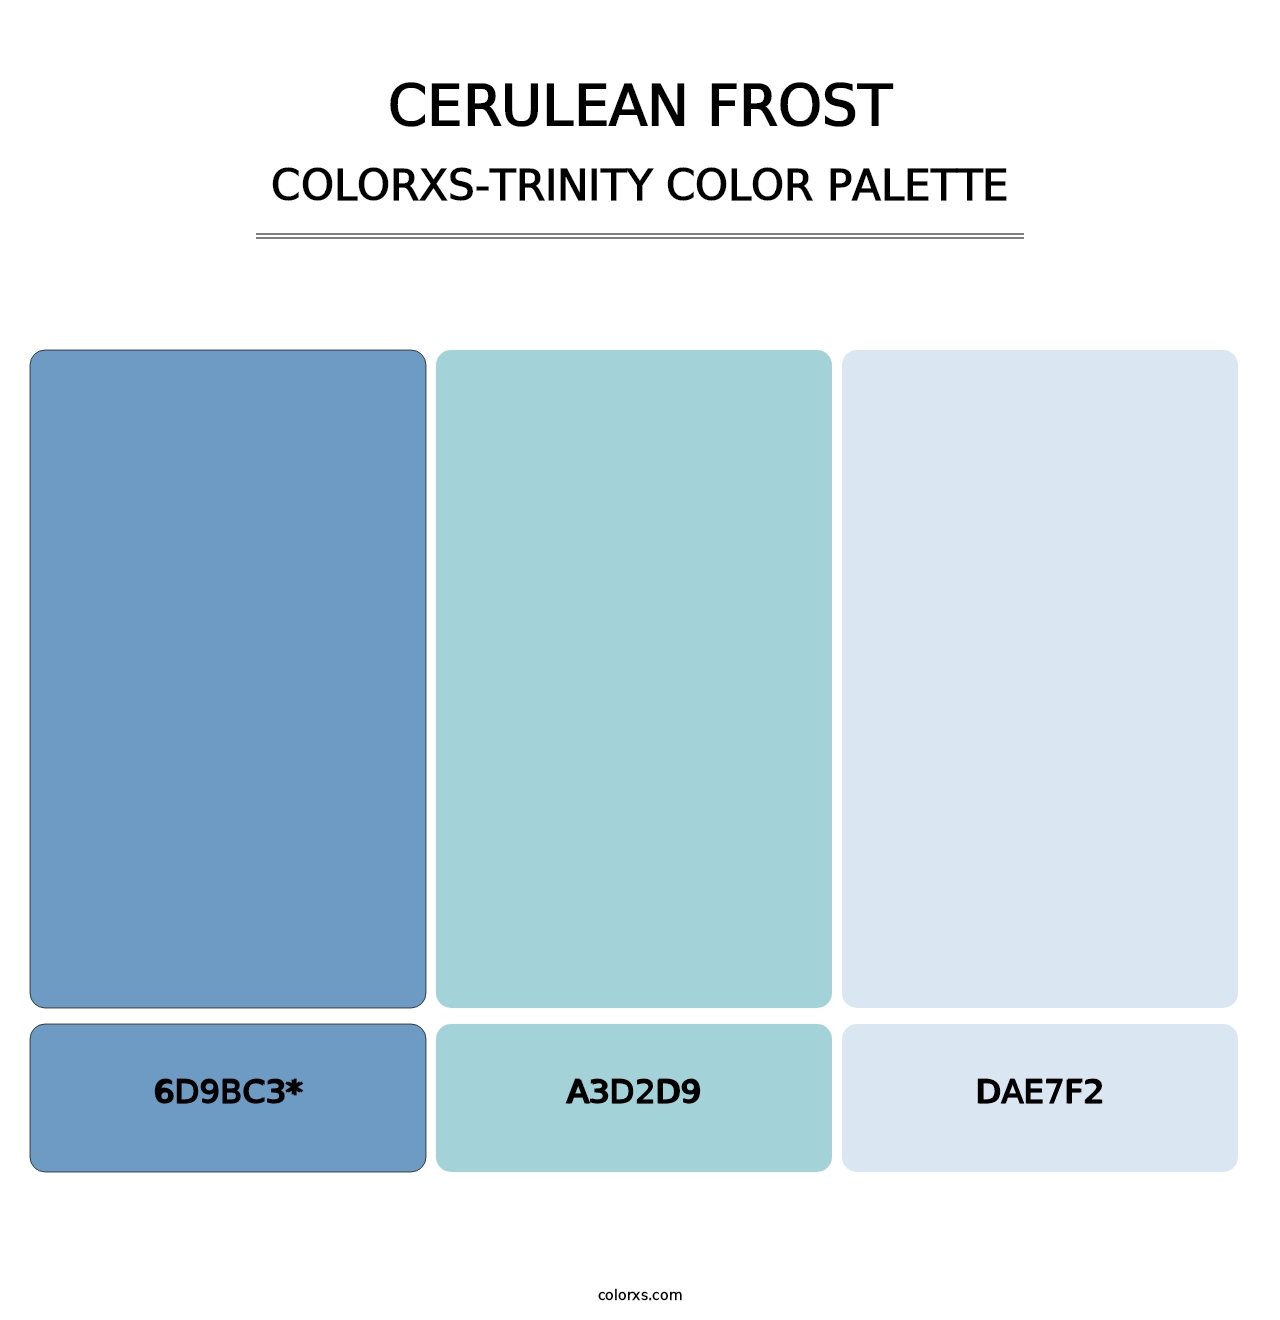 Cerulean Frost - Colorxs Trinity Palette